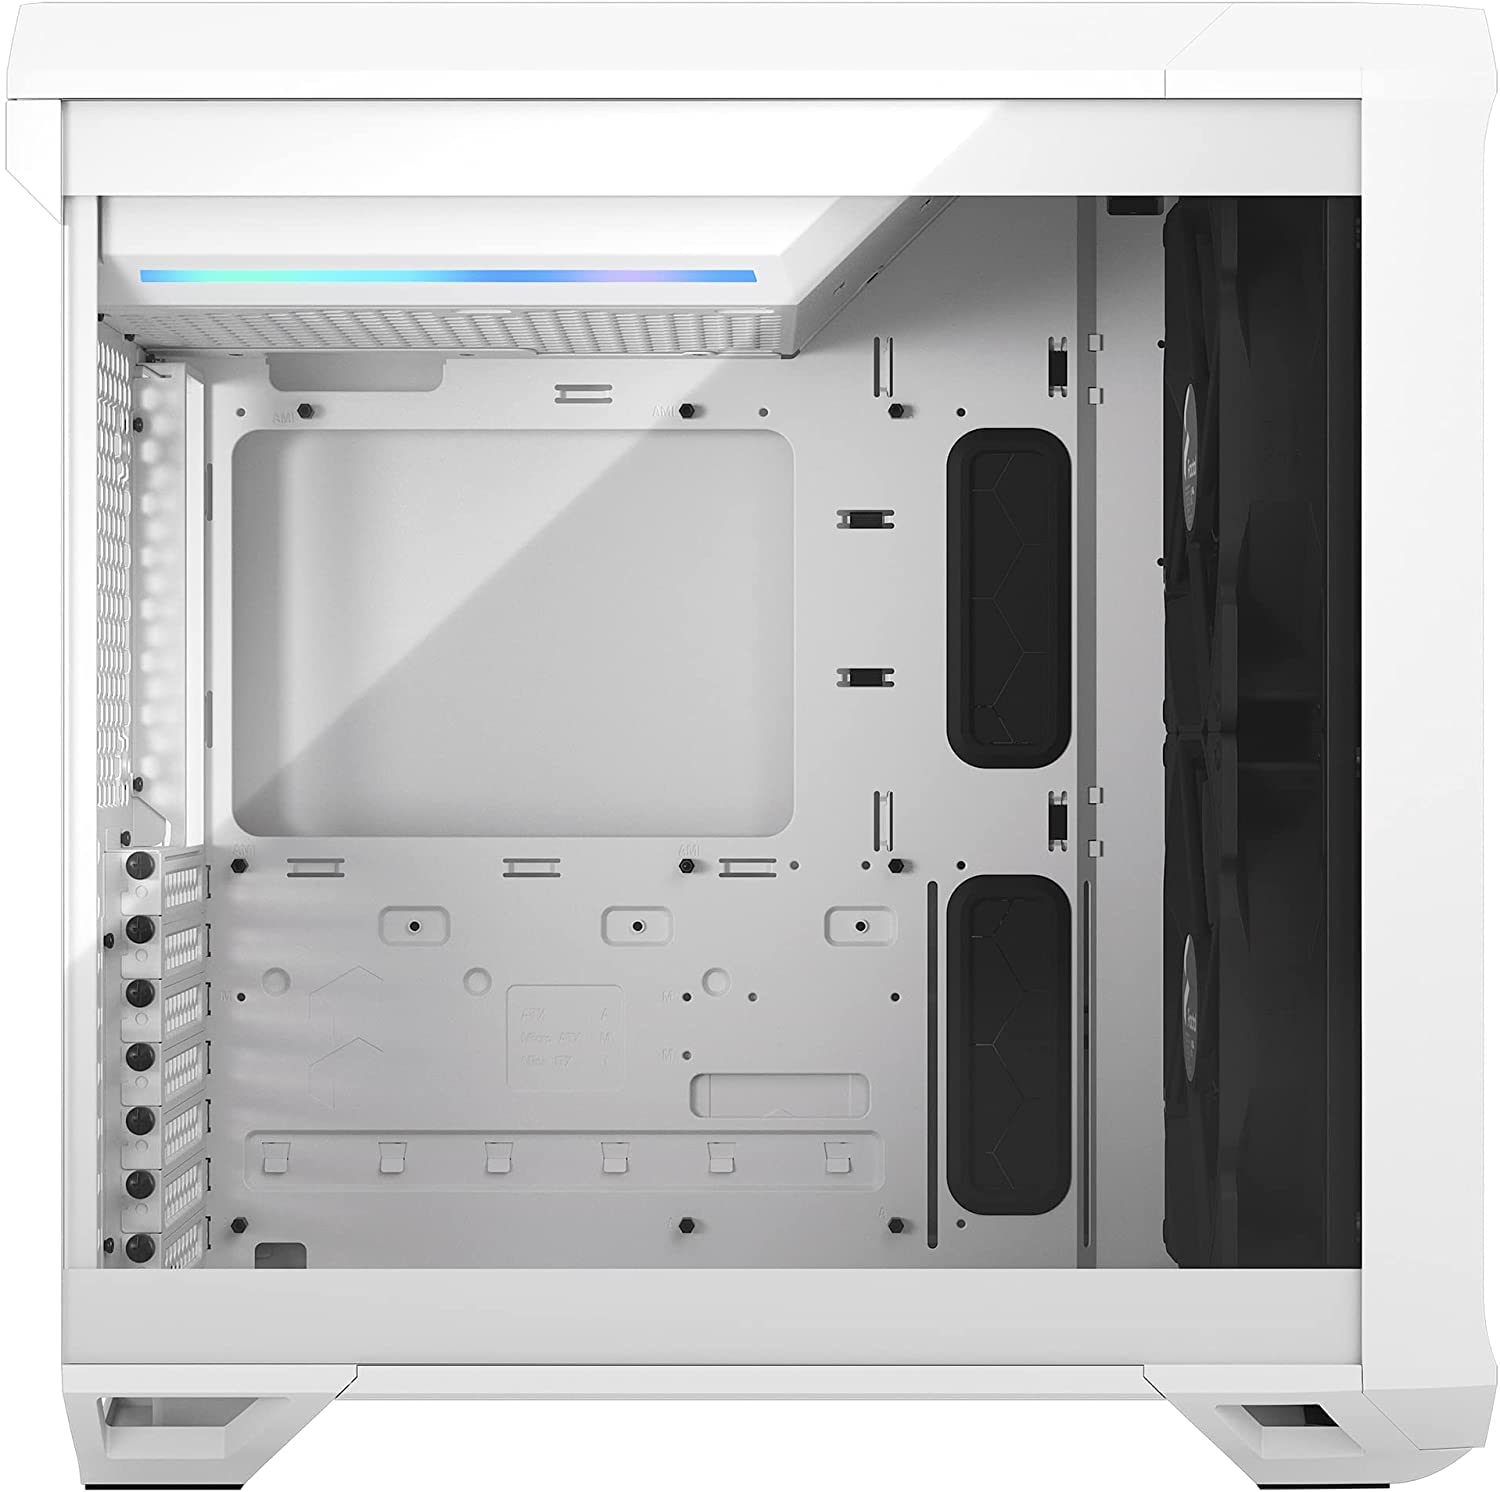 Fractal Design Torrent Compact White TG Clear - Tower - White - Tempered Glass, Steel - 4 x Bay - 2 x 7.09 x Fan(s) Installed - 0 - ATX, EATX, Micro ATX, Mini ITX, SSI CEB Motherboard Supported